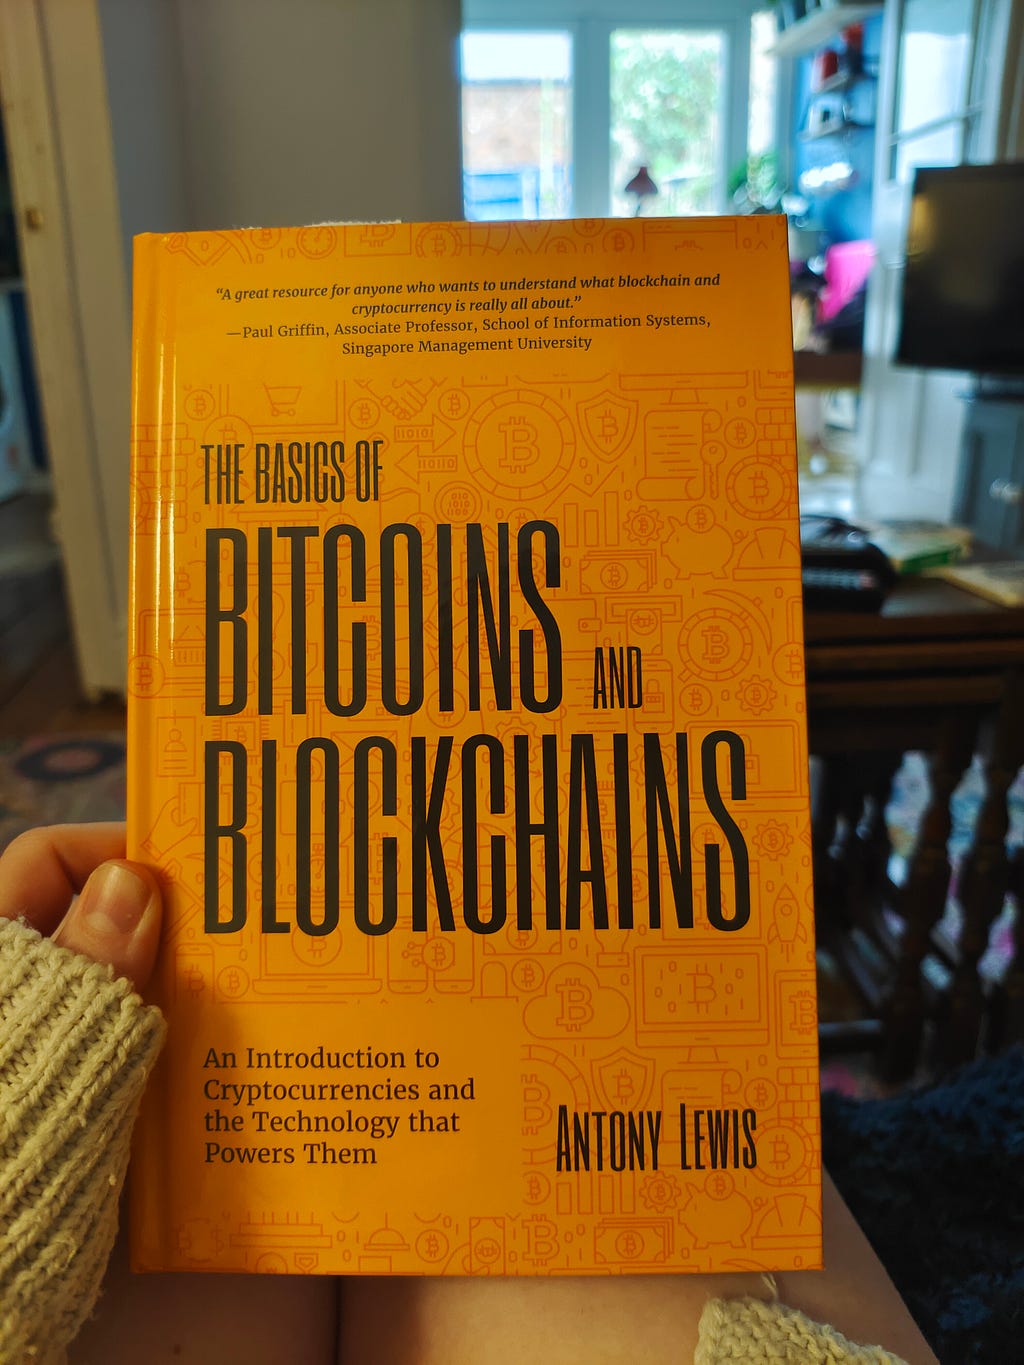 Book — The Basics of Bitcoins and Blockchains by Antony Lewis